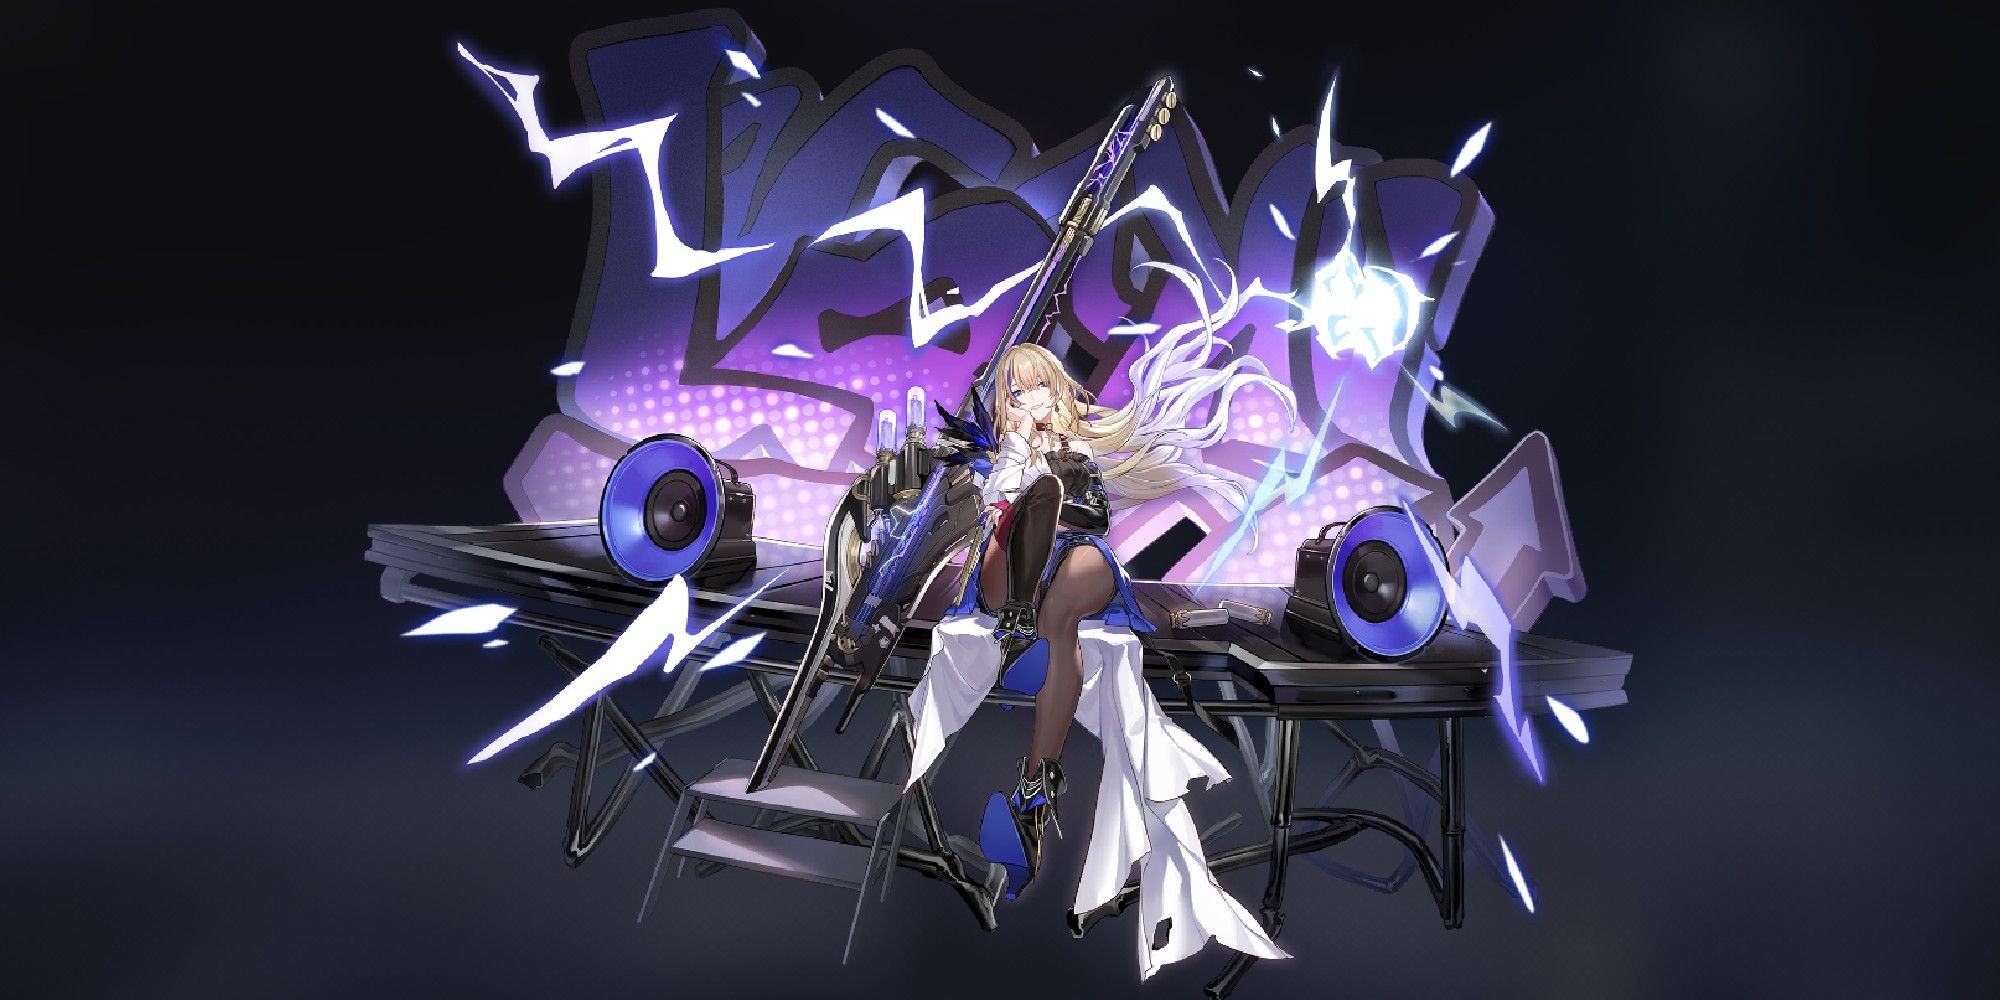 Serval’s splash art. It depicts her sitting onstage with her guitar, surrounded by electricity.